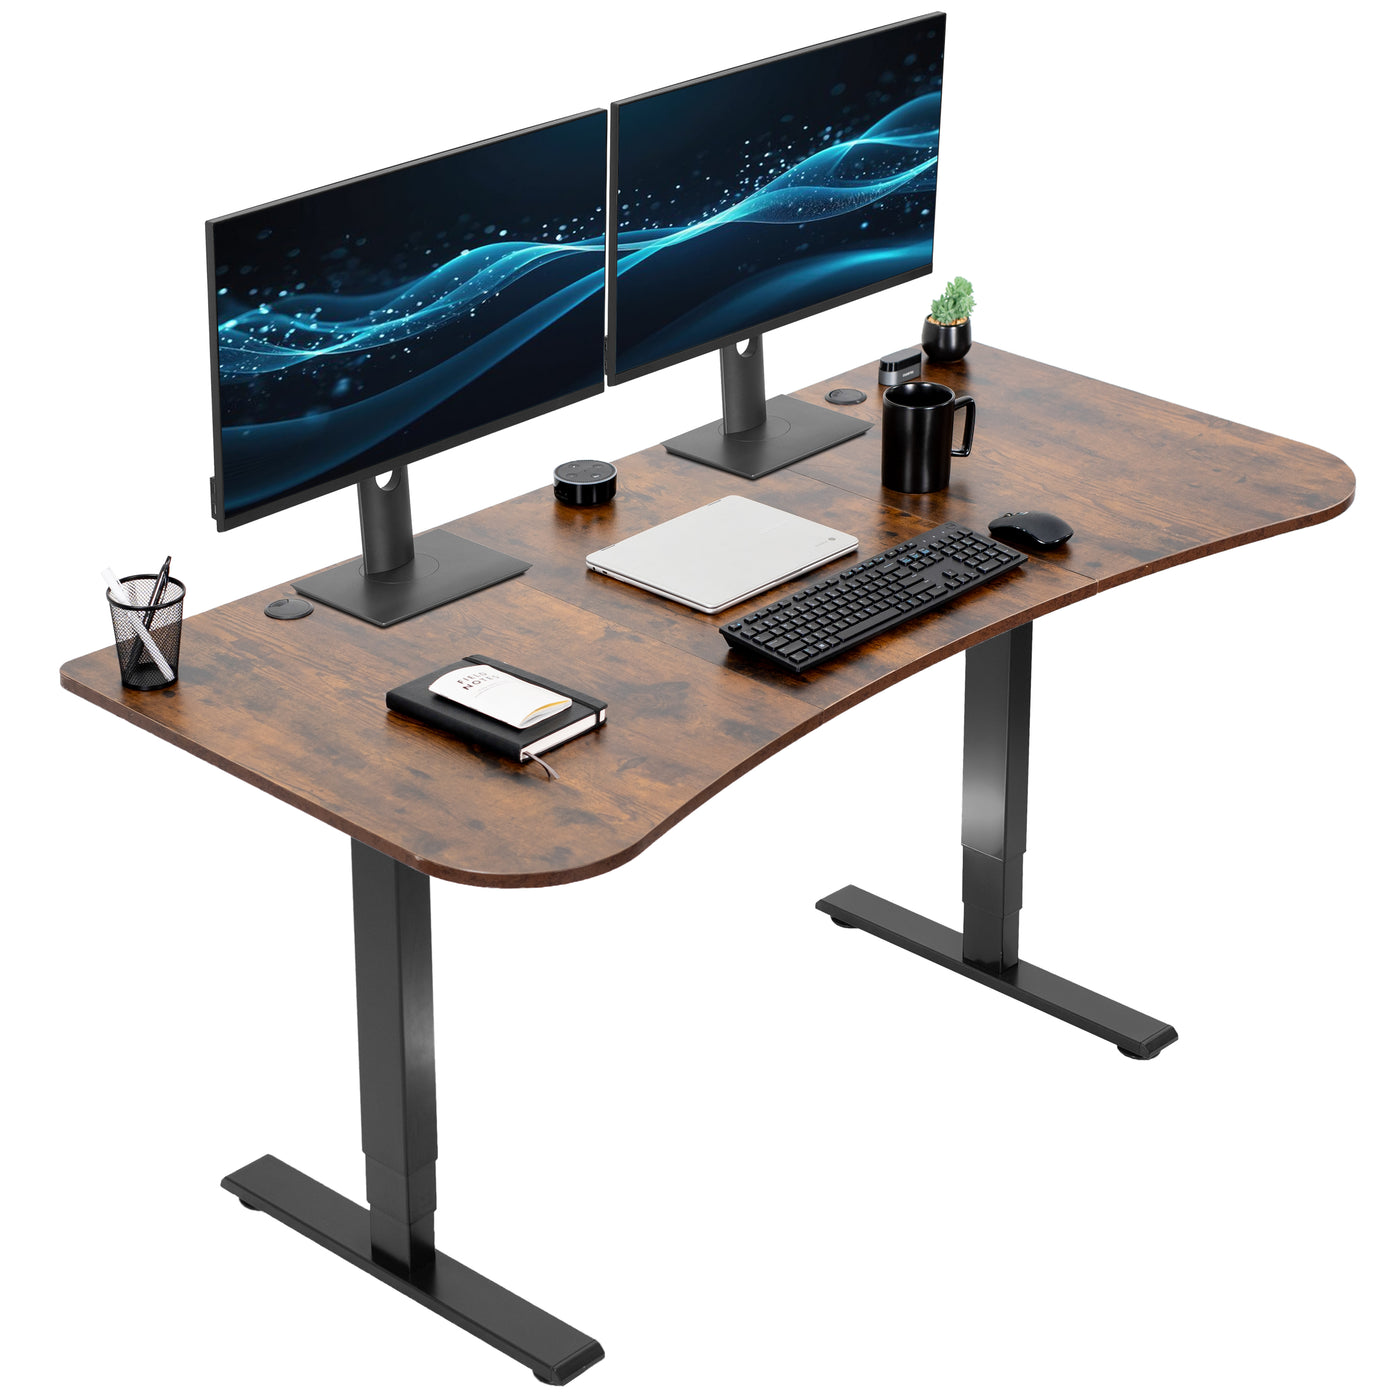 Rustic 63” x 32” Electric Height Adjustable Stand Up Desk